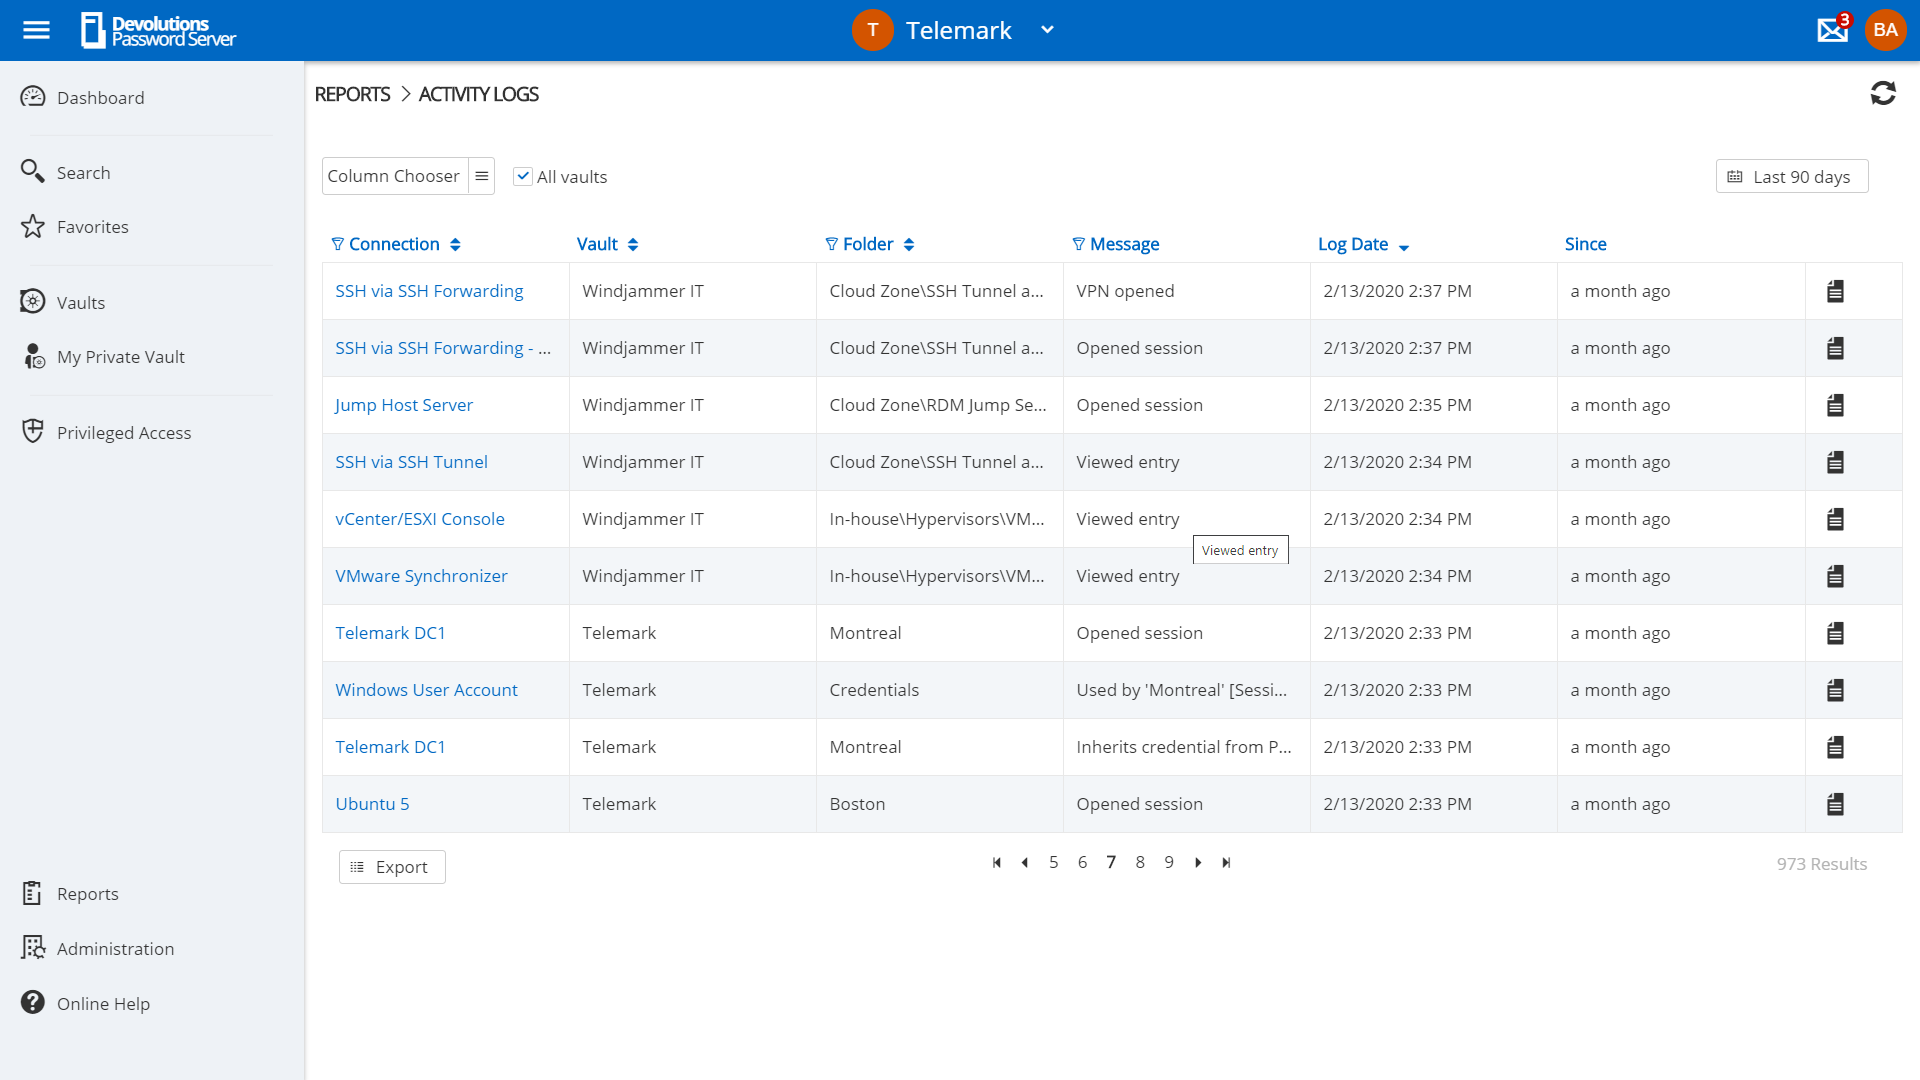 Run Powerful Reports and Logs for Compliance Needs